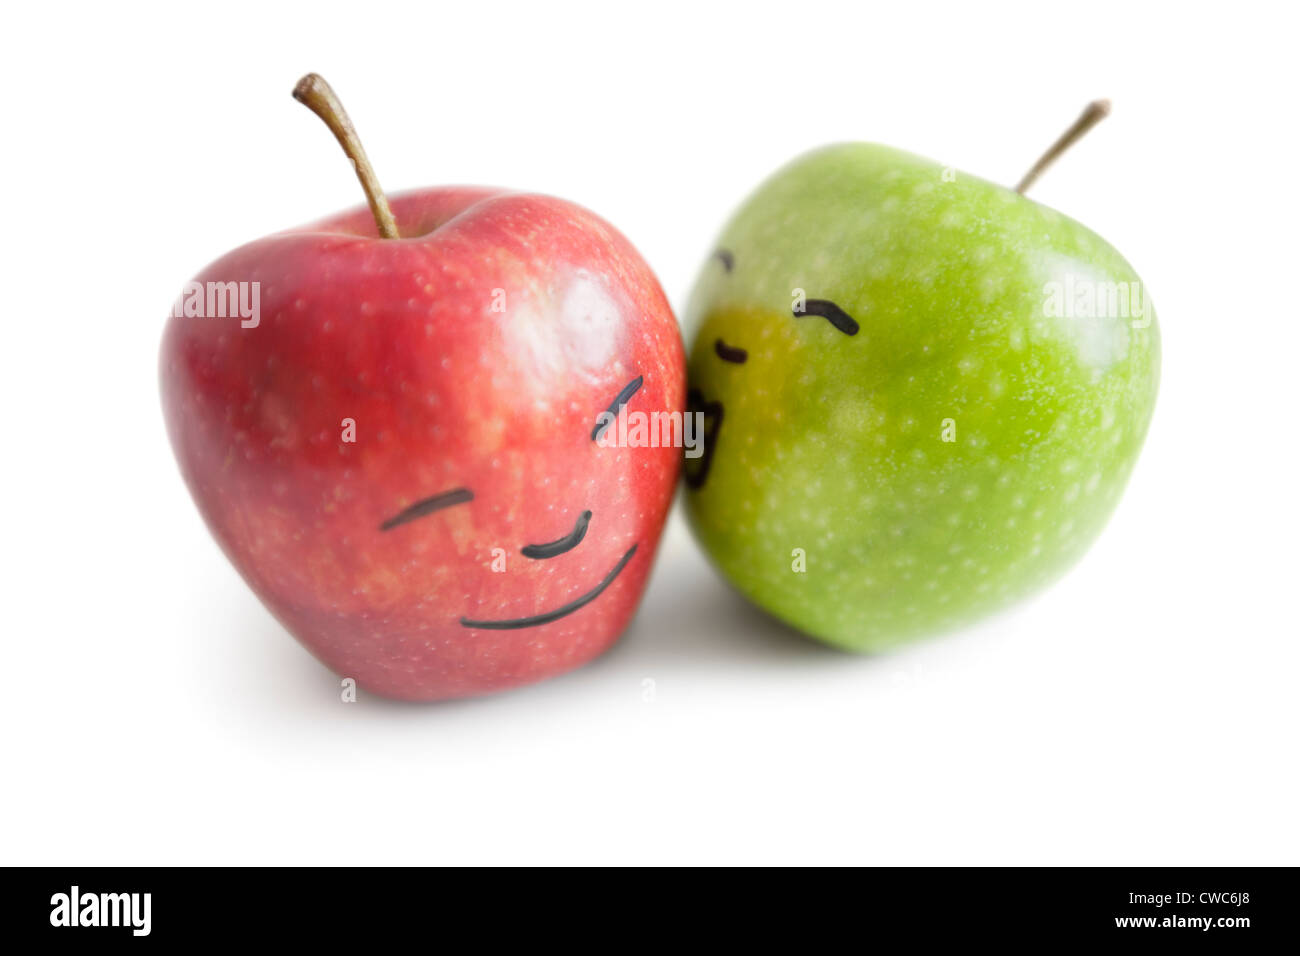 Granny smith apple kissing red apple over white background Stock Photo